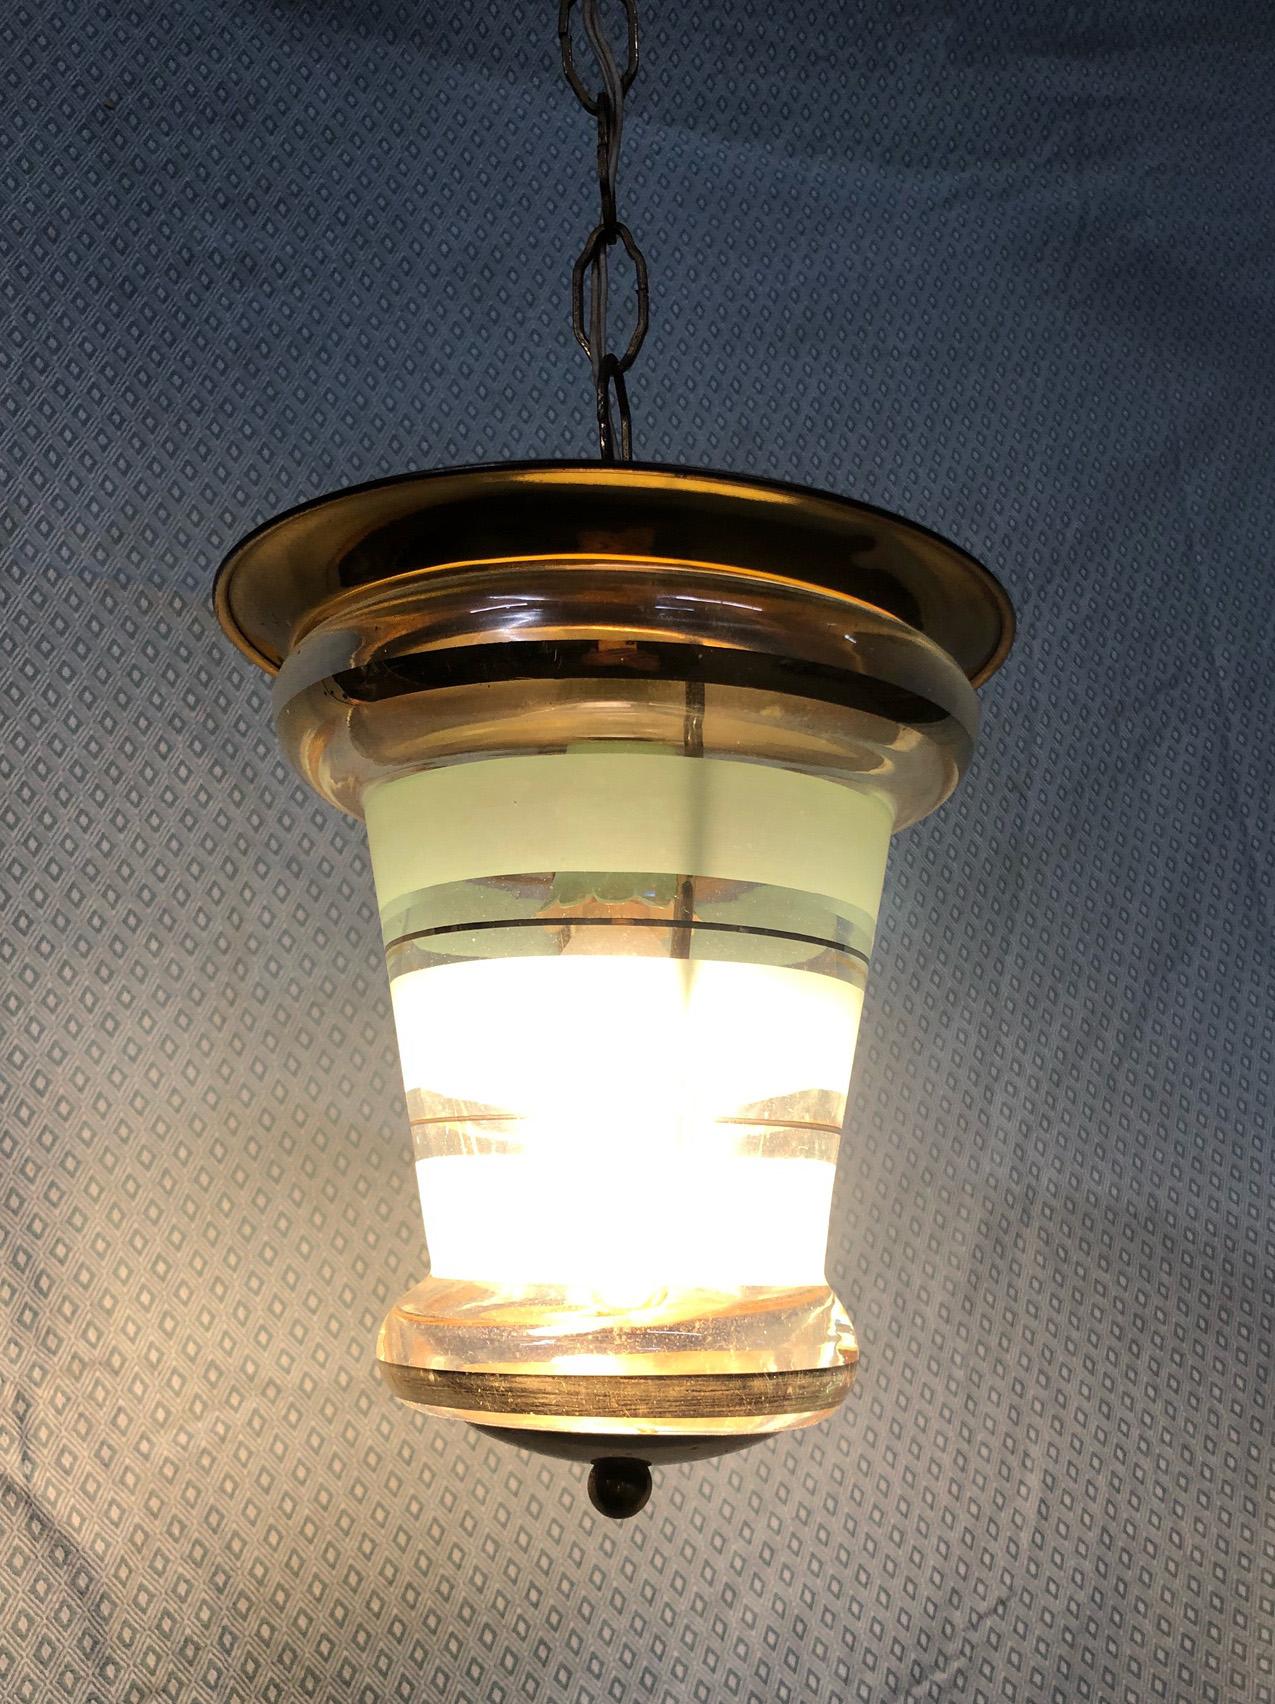 Mid-Century Modern Italian Chandelier from 1950 with Original Glass and Brass